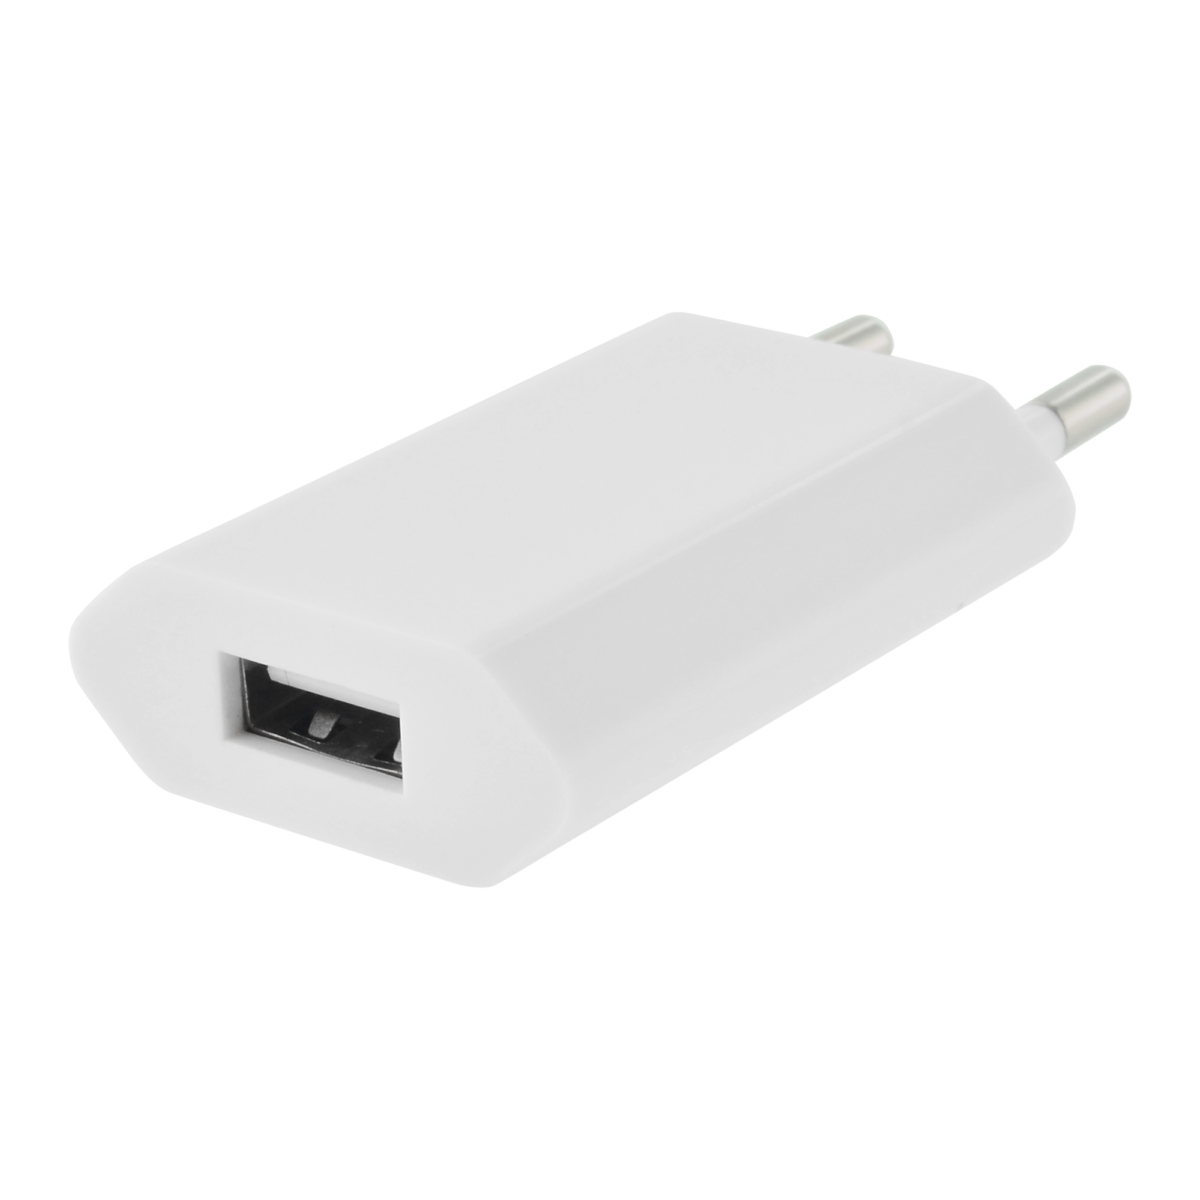 Chargeur mural USB pour smartphone blanc